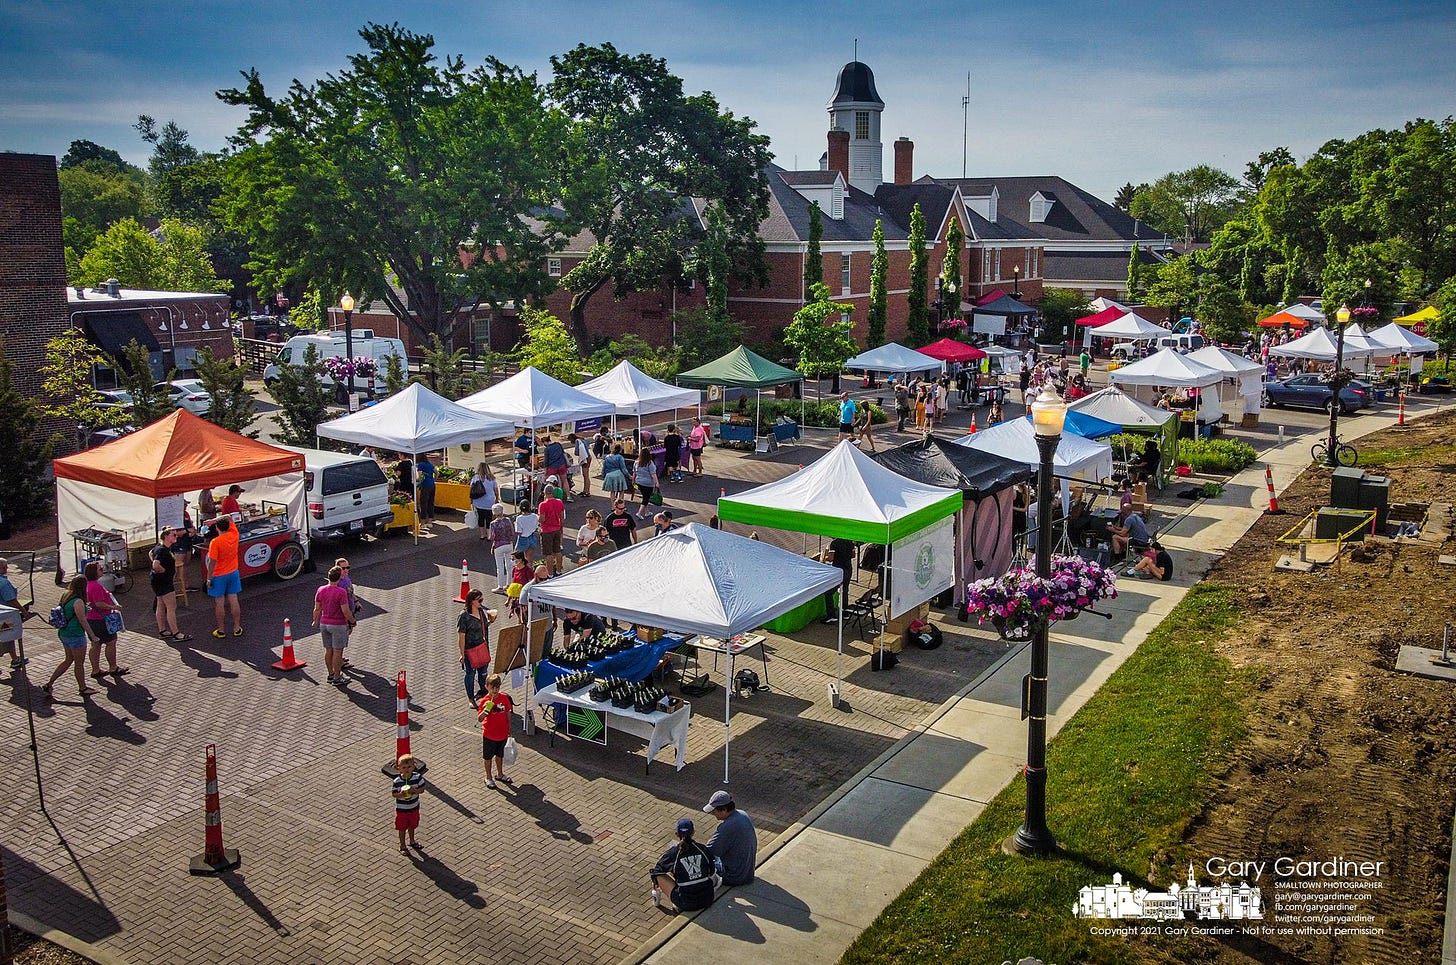 The first Saturday Farmers Market opened behind city hall to warm temperatures, a large number of vendors, and a crowd eager to see the market begin another year of summer treats. My Final Photo for May 22, 2021.